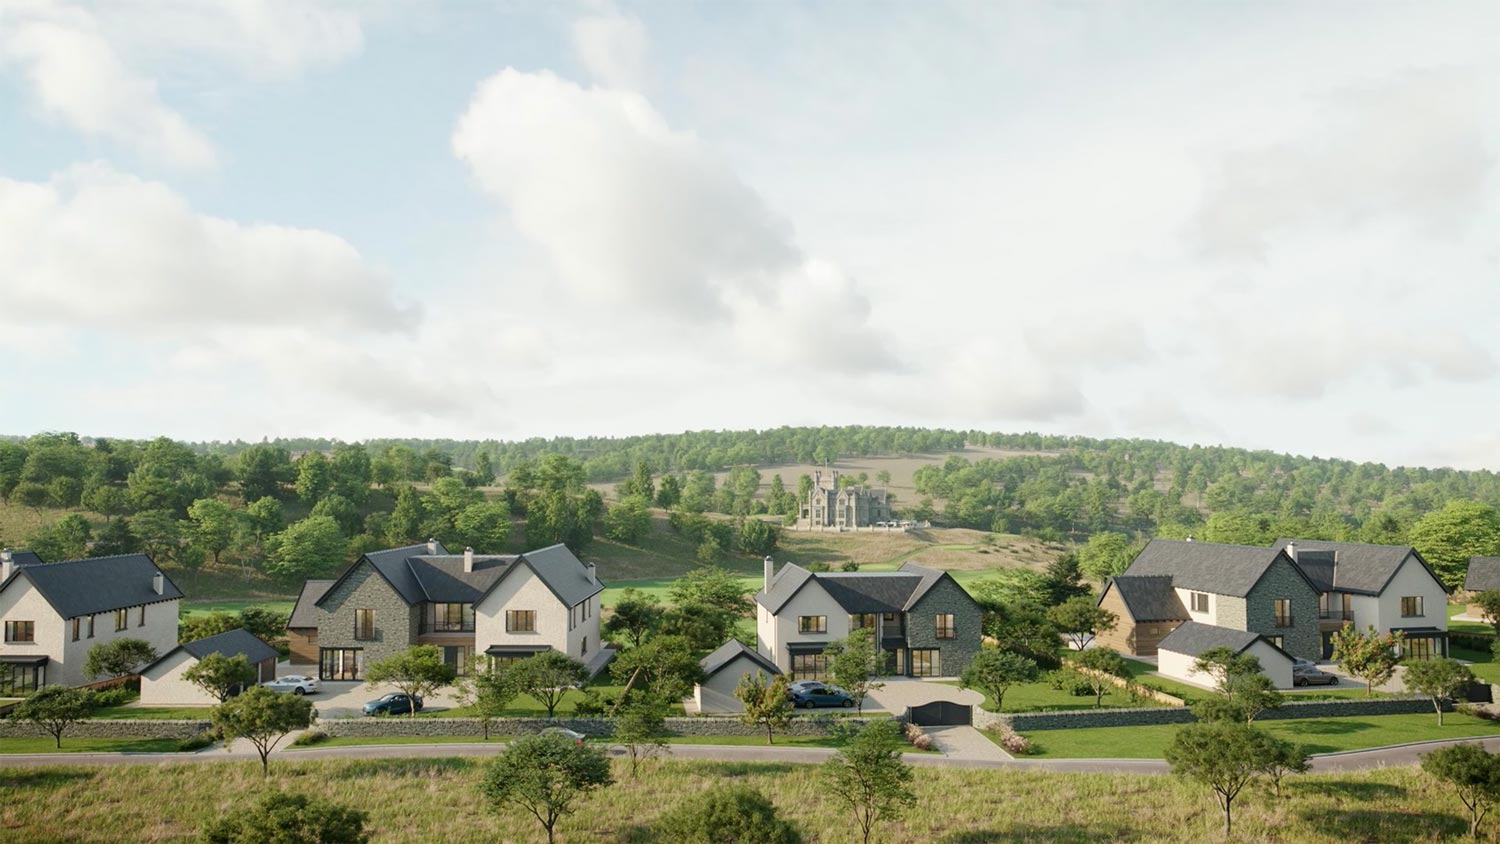 Golf legend Jack Nicklaus launches luxury residential and golf development in Stonehaven